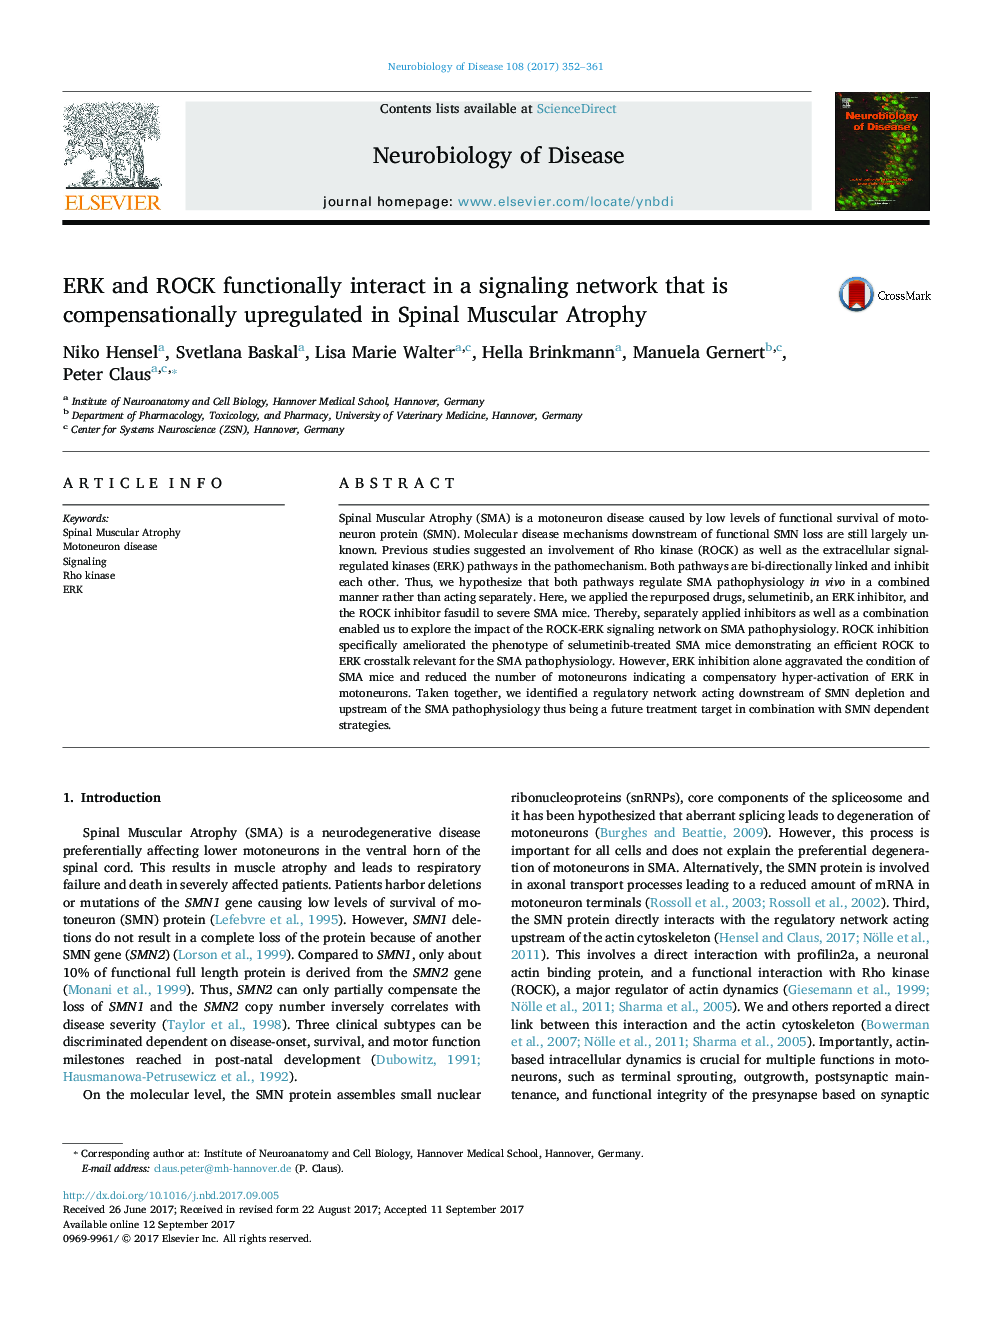 ERK and ROCK functionally interact in a signaling network that is compensationally upregulated in Spinal Muscular Atrophy